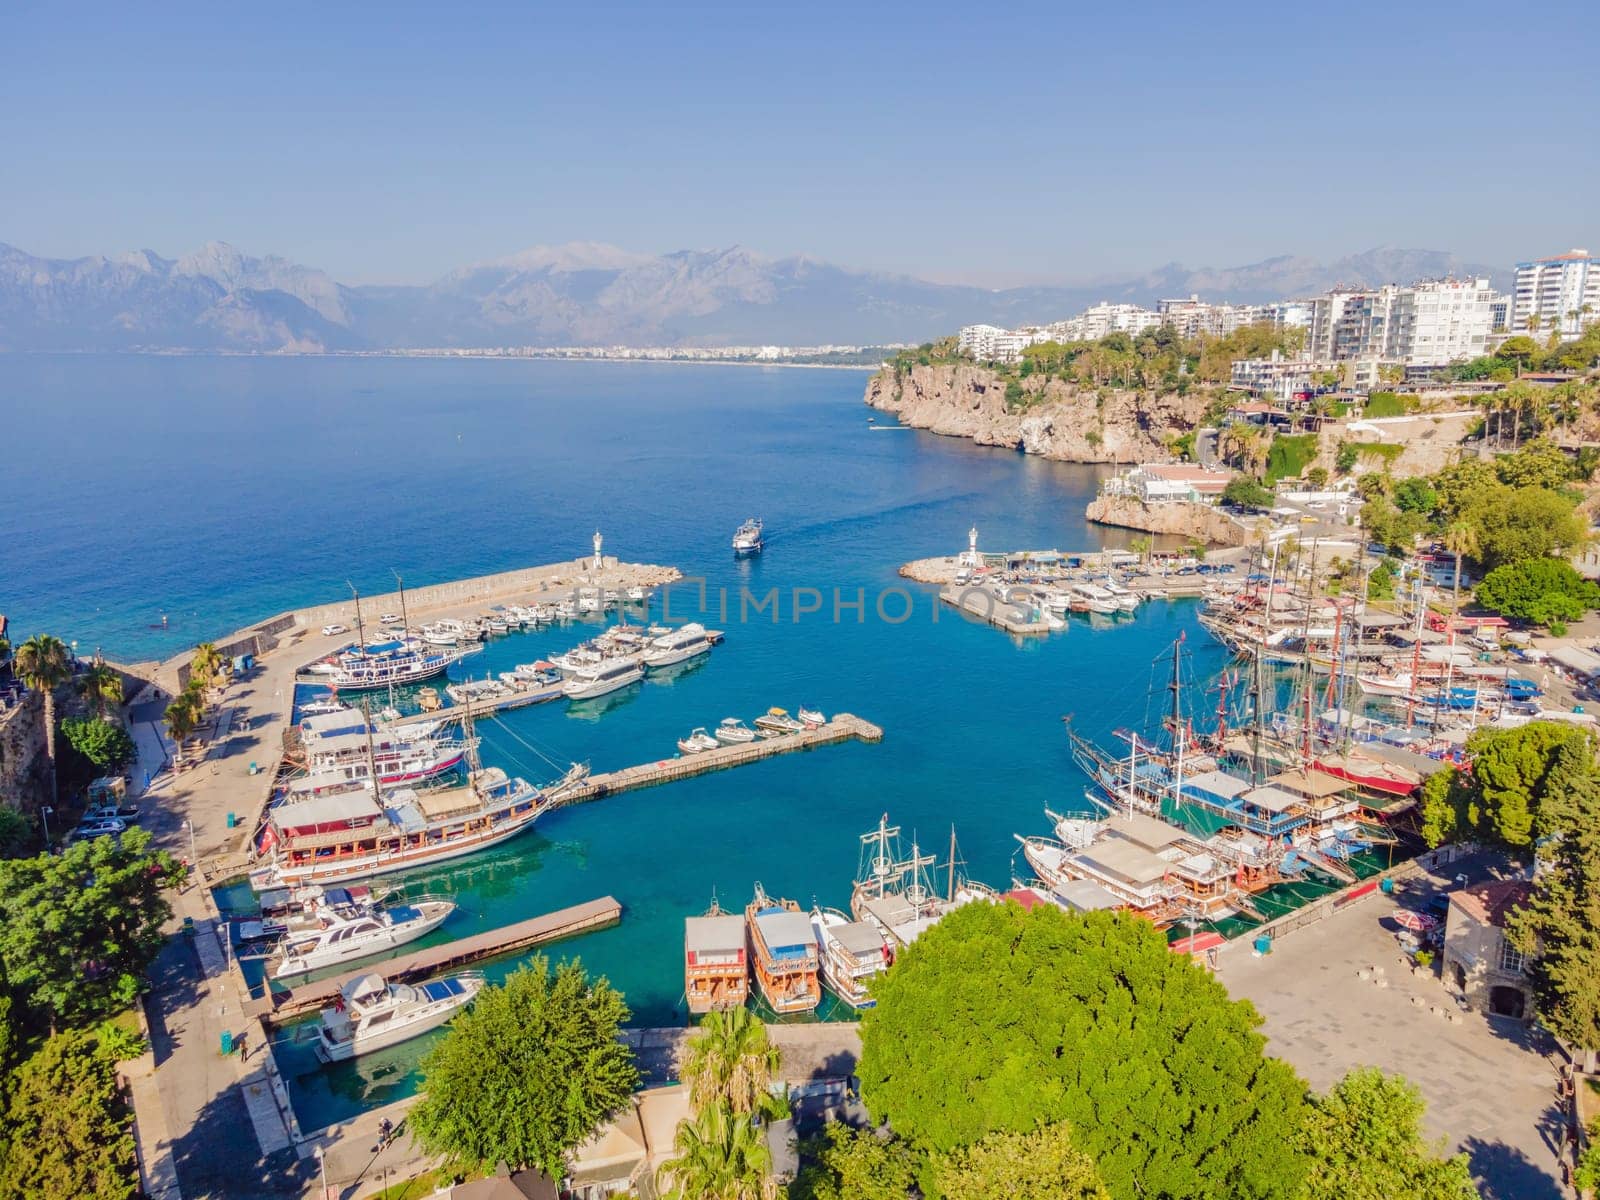 View of old Antalya from a drone or bird's eye view. This is the area of the old city and the old harbor.